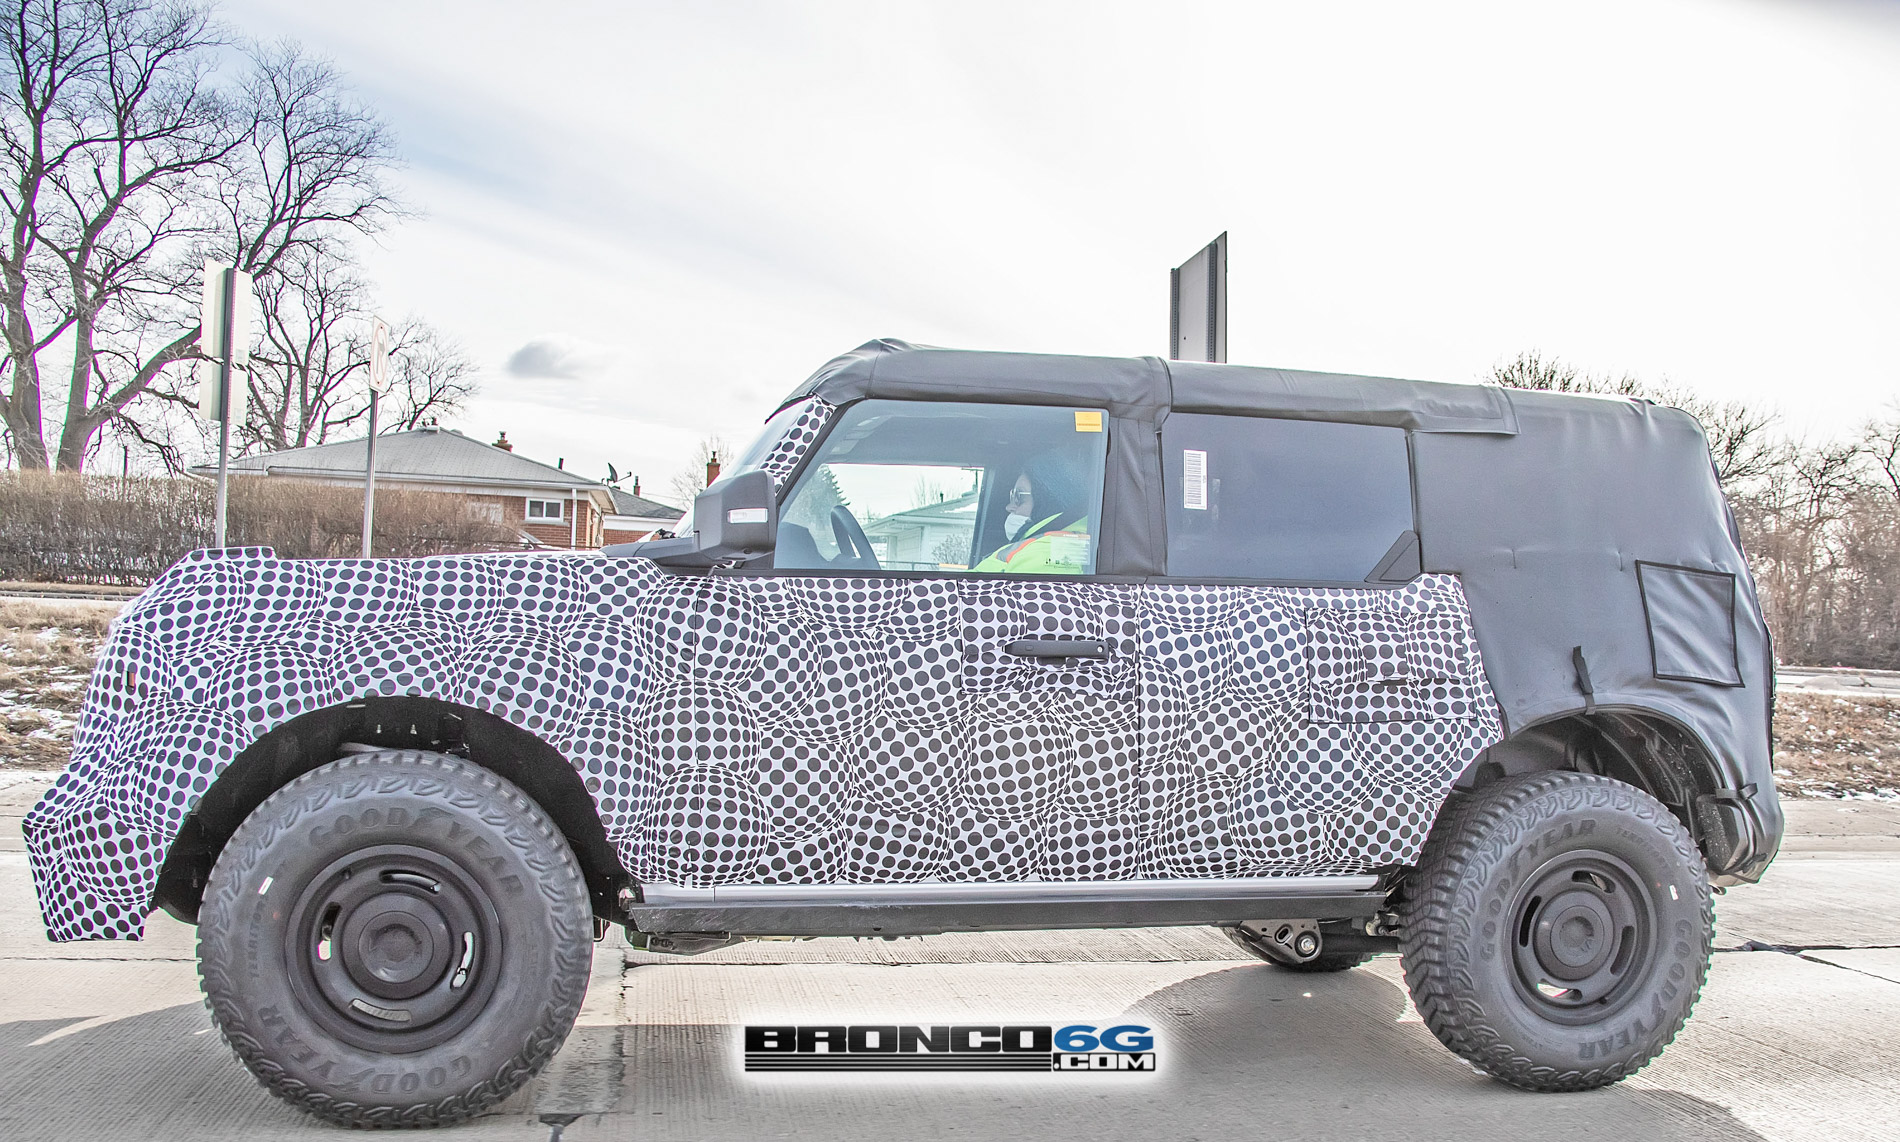 Ford Bronco HERITAGE EDITION Bronco Spied! Riding on 35's, Classic 4-Slot Wheel Design and White Grille! 2021 Bronco Heritage Edition - Bronco6g.com 10